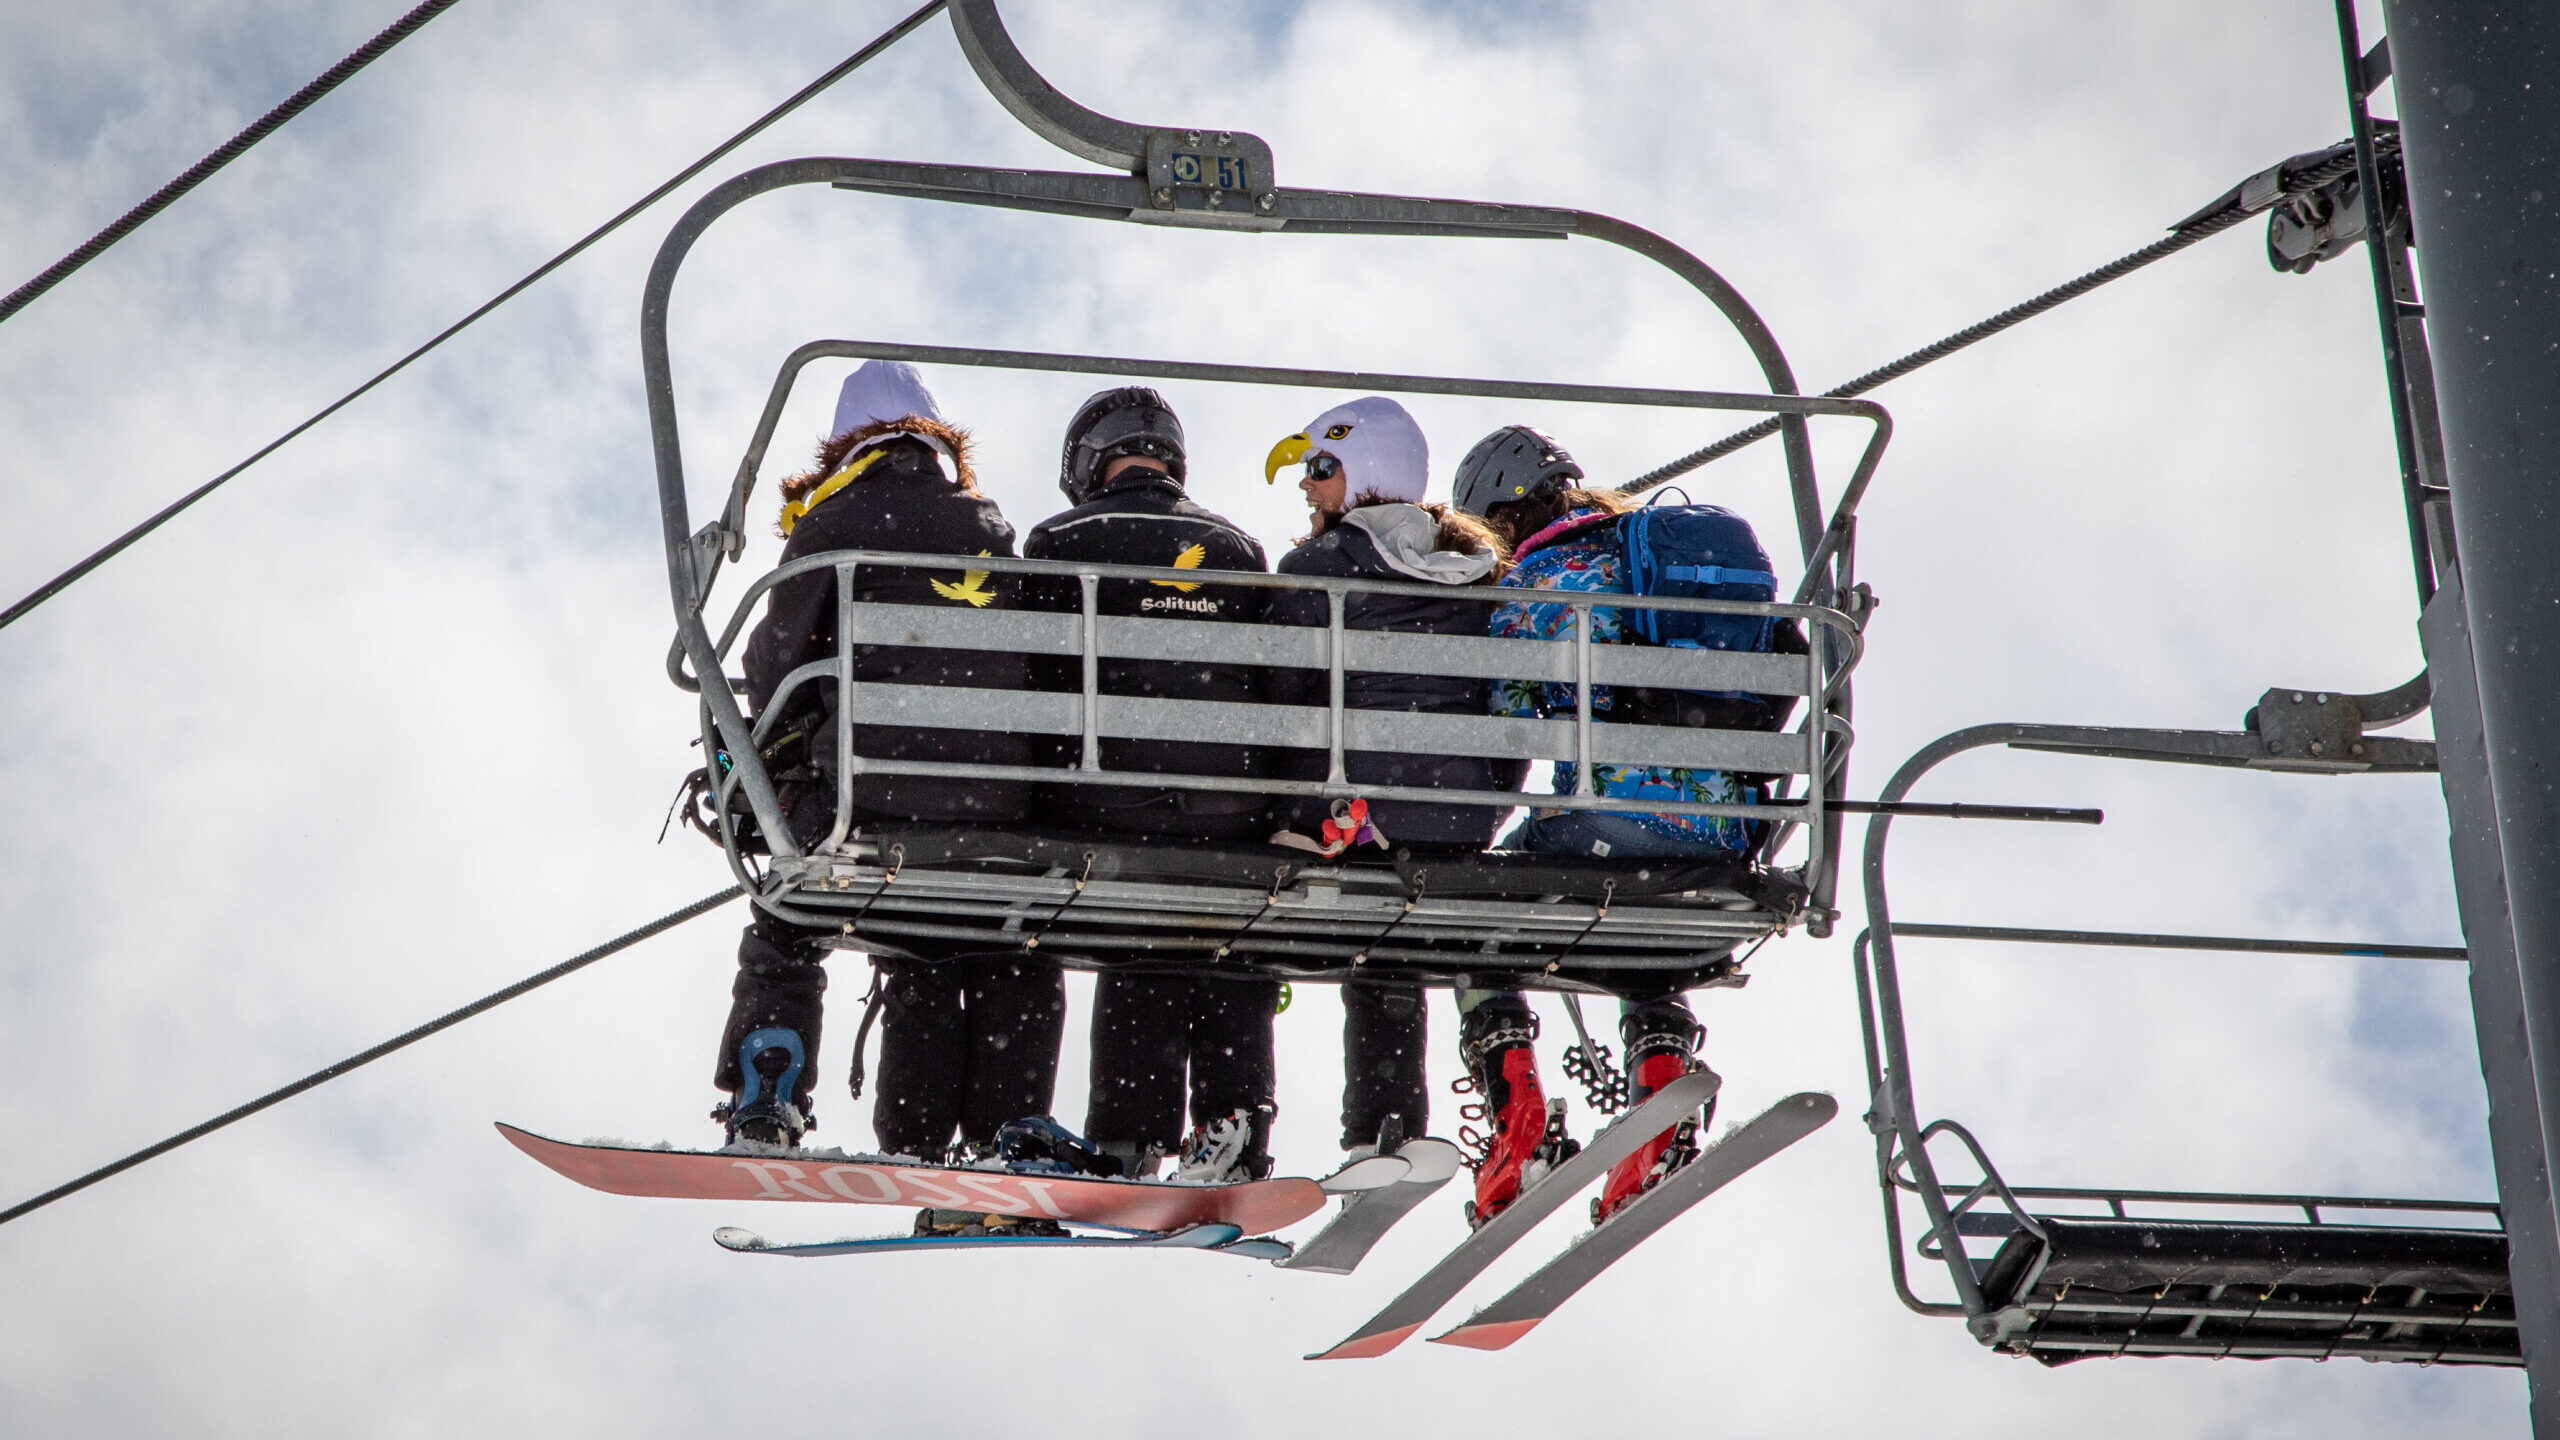 Skiers and snowboarders are seen riding on a ski lift, recreators should look at Utah avalanche for...